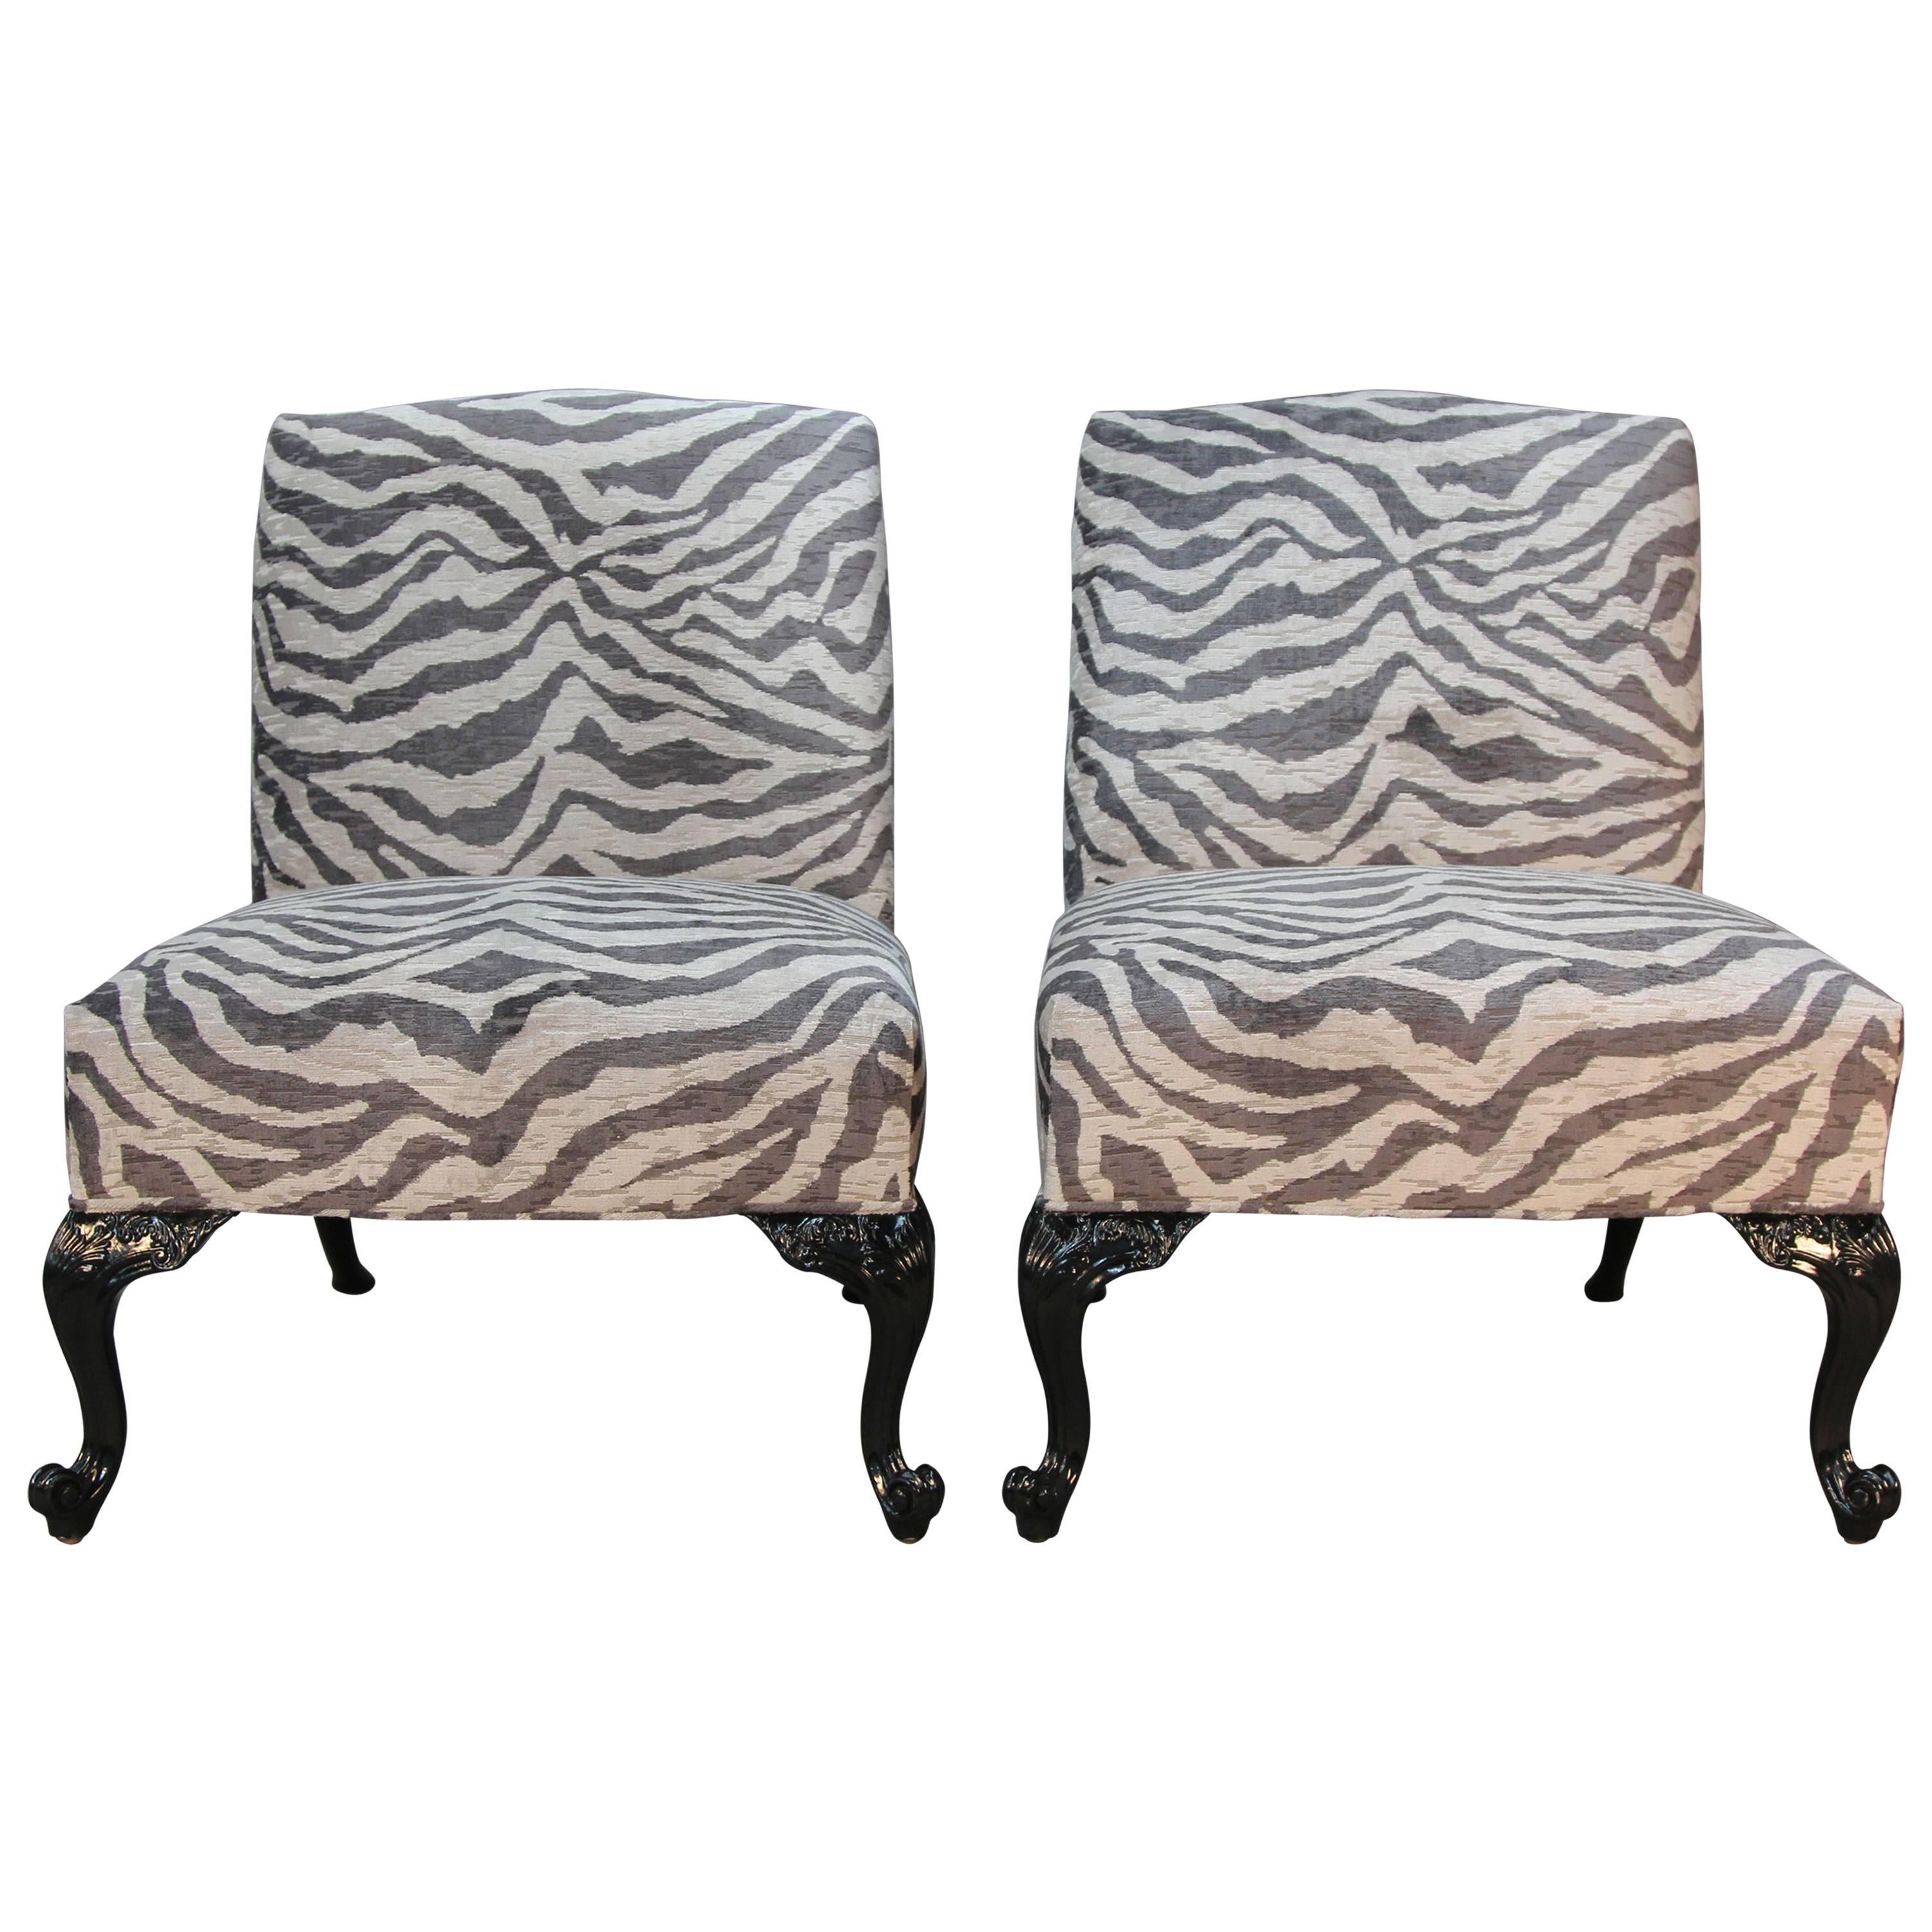 Newly Lacquered and Upholstered Traditional Slipper Chairs For Sale